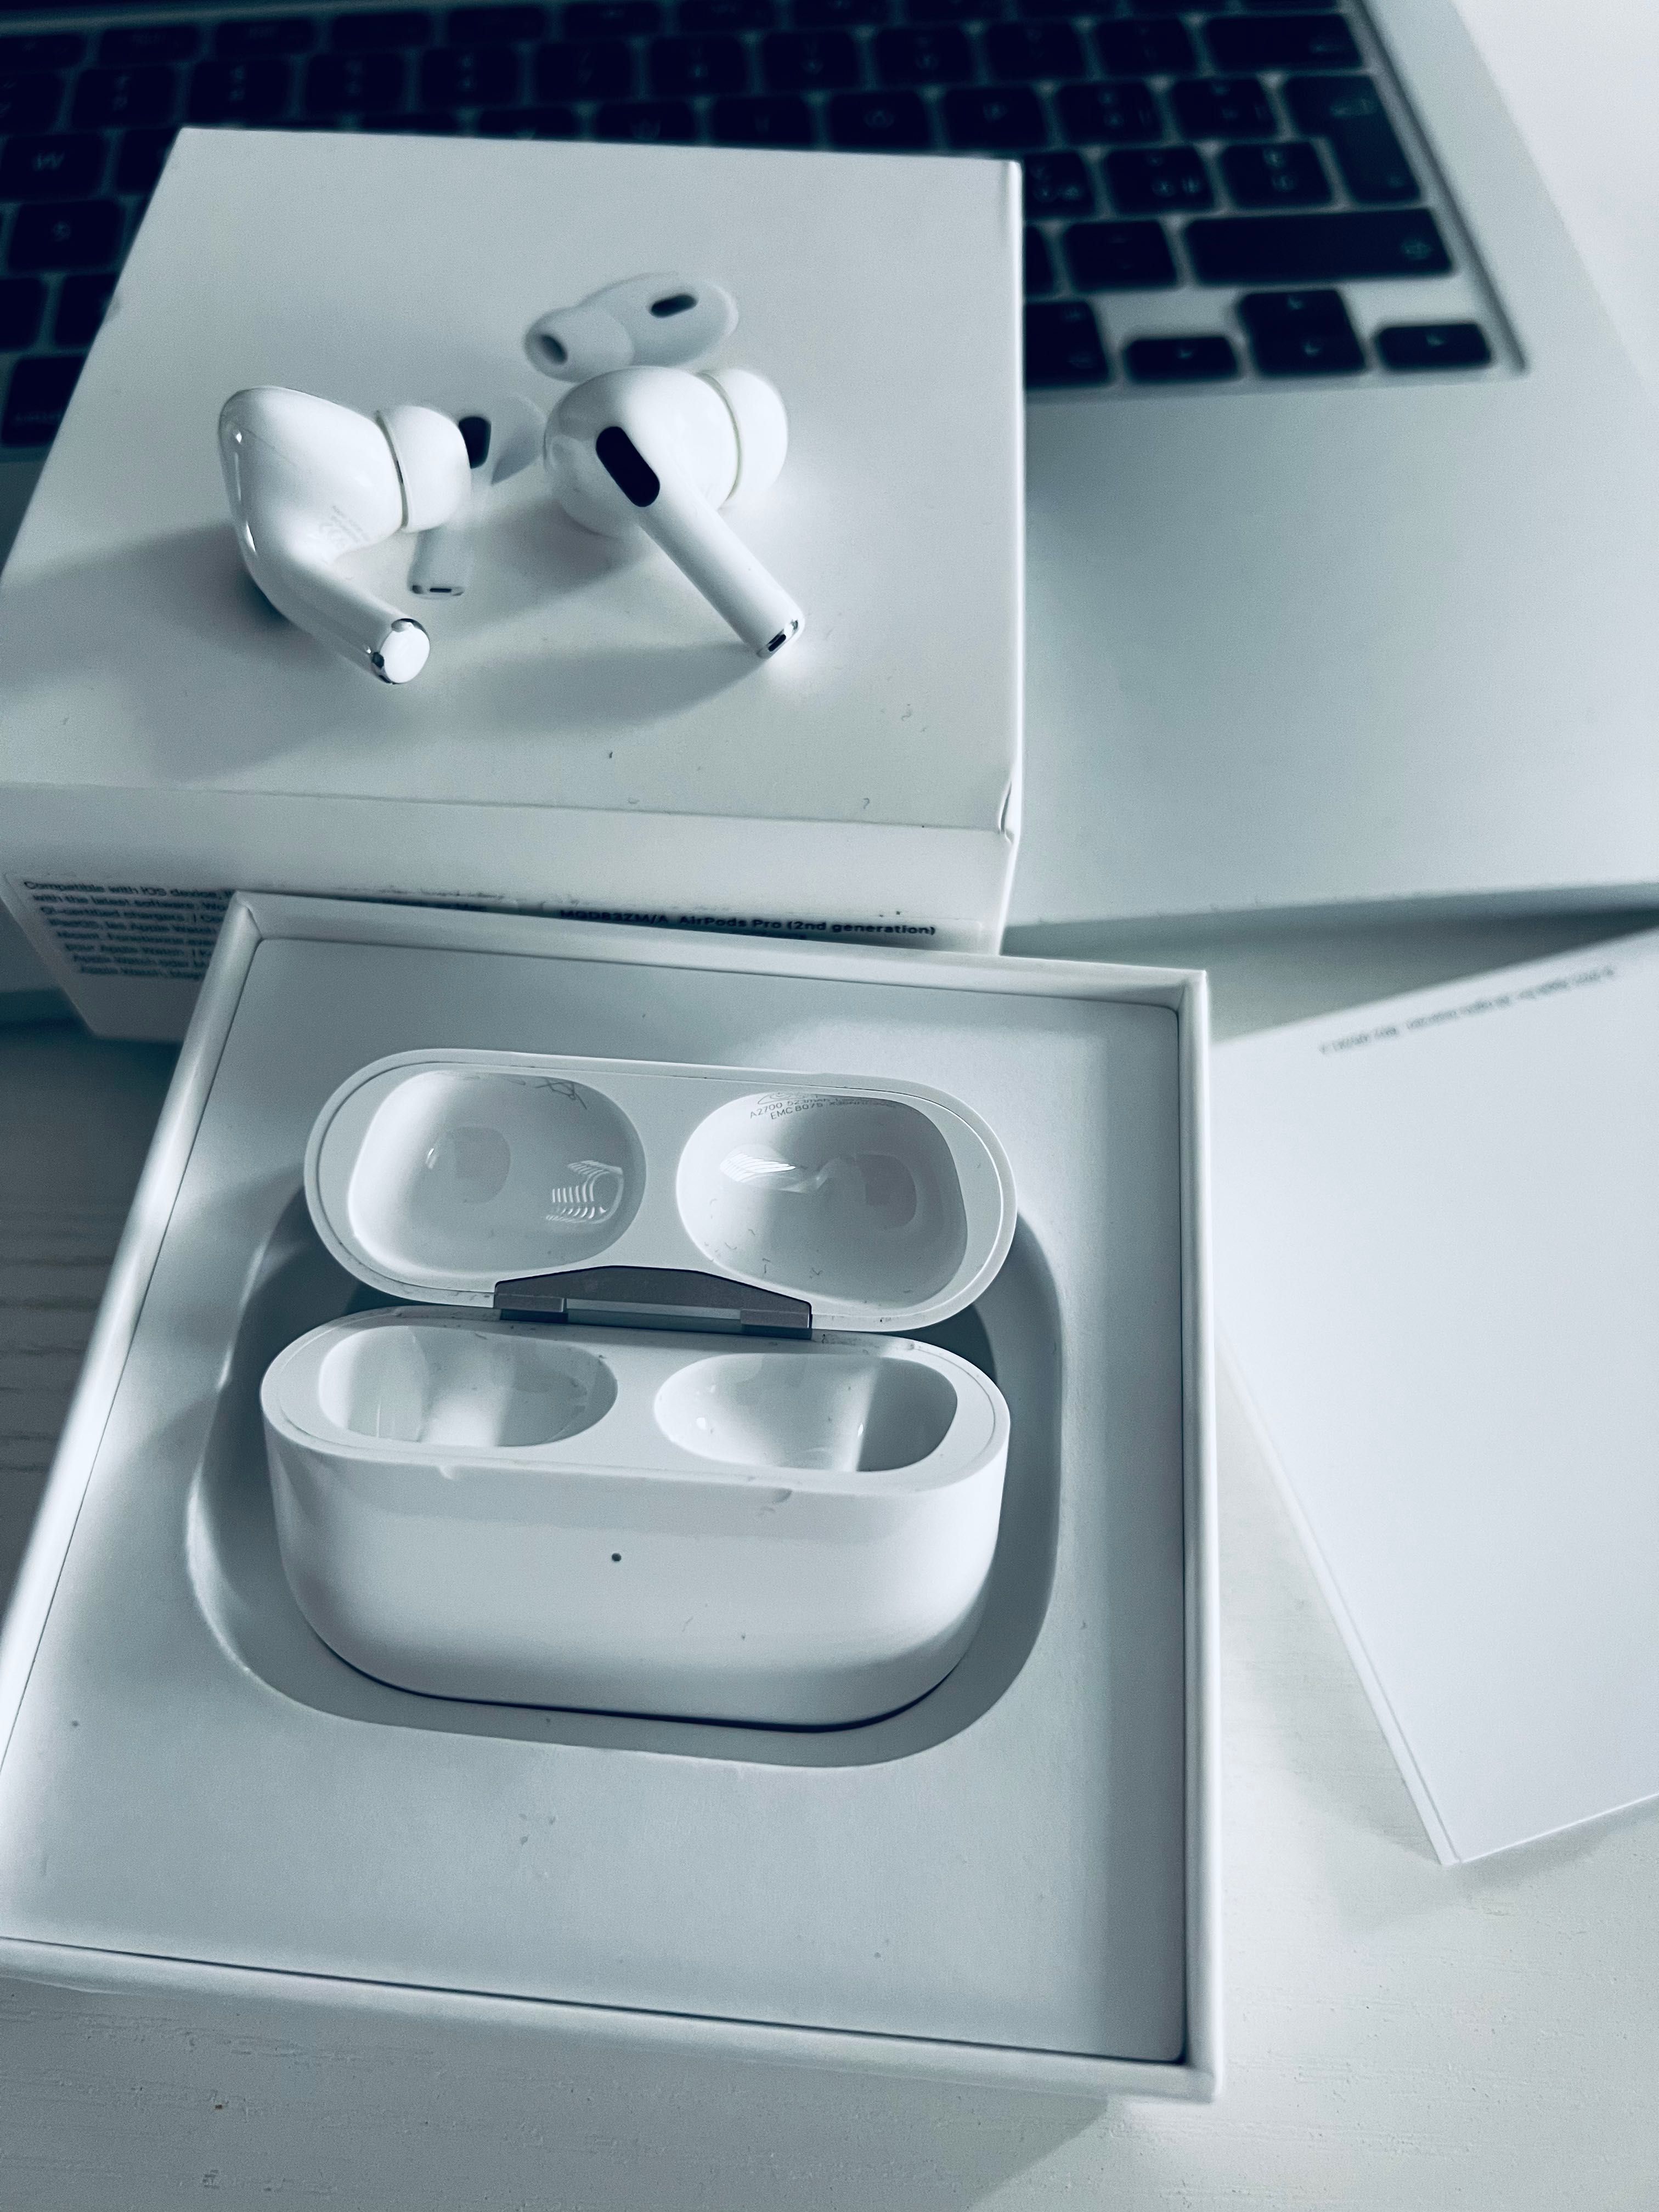 Vand APPLE AirPods Pro 2